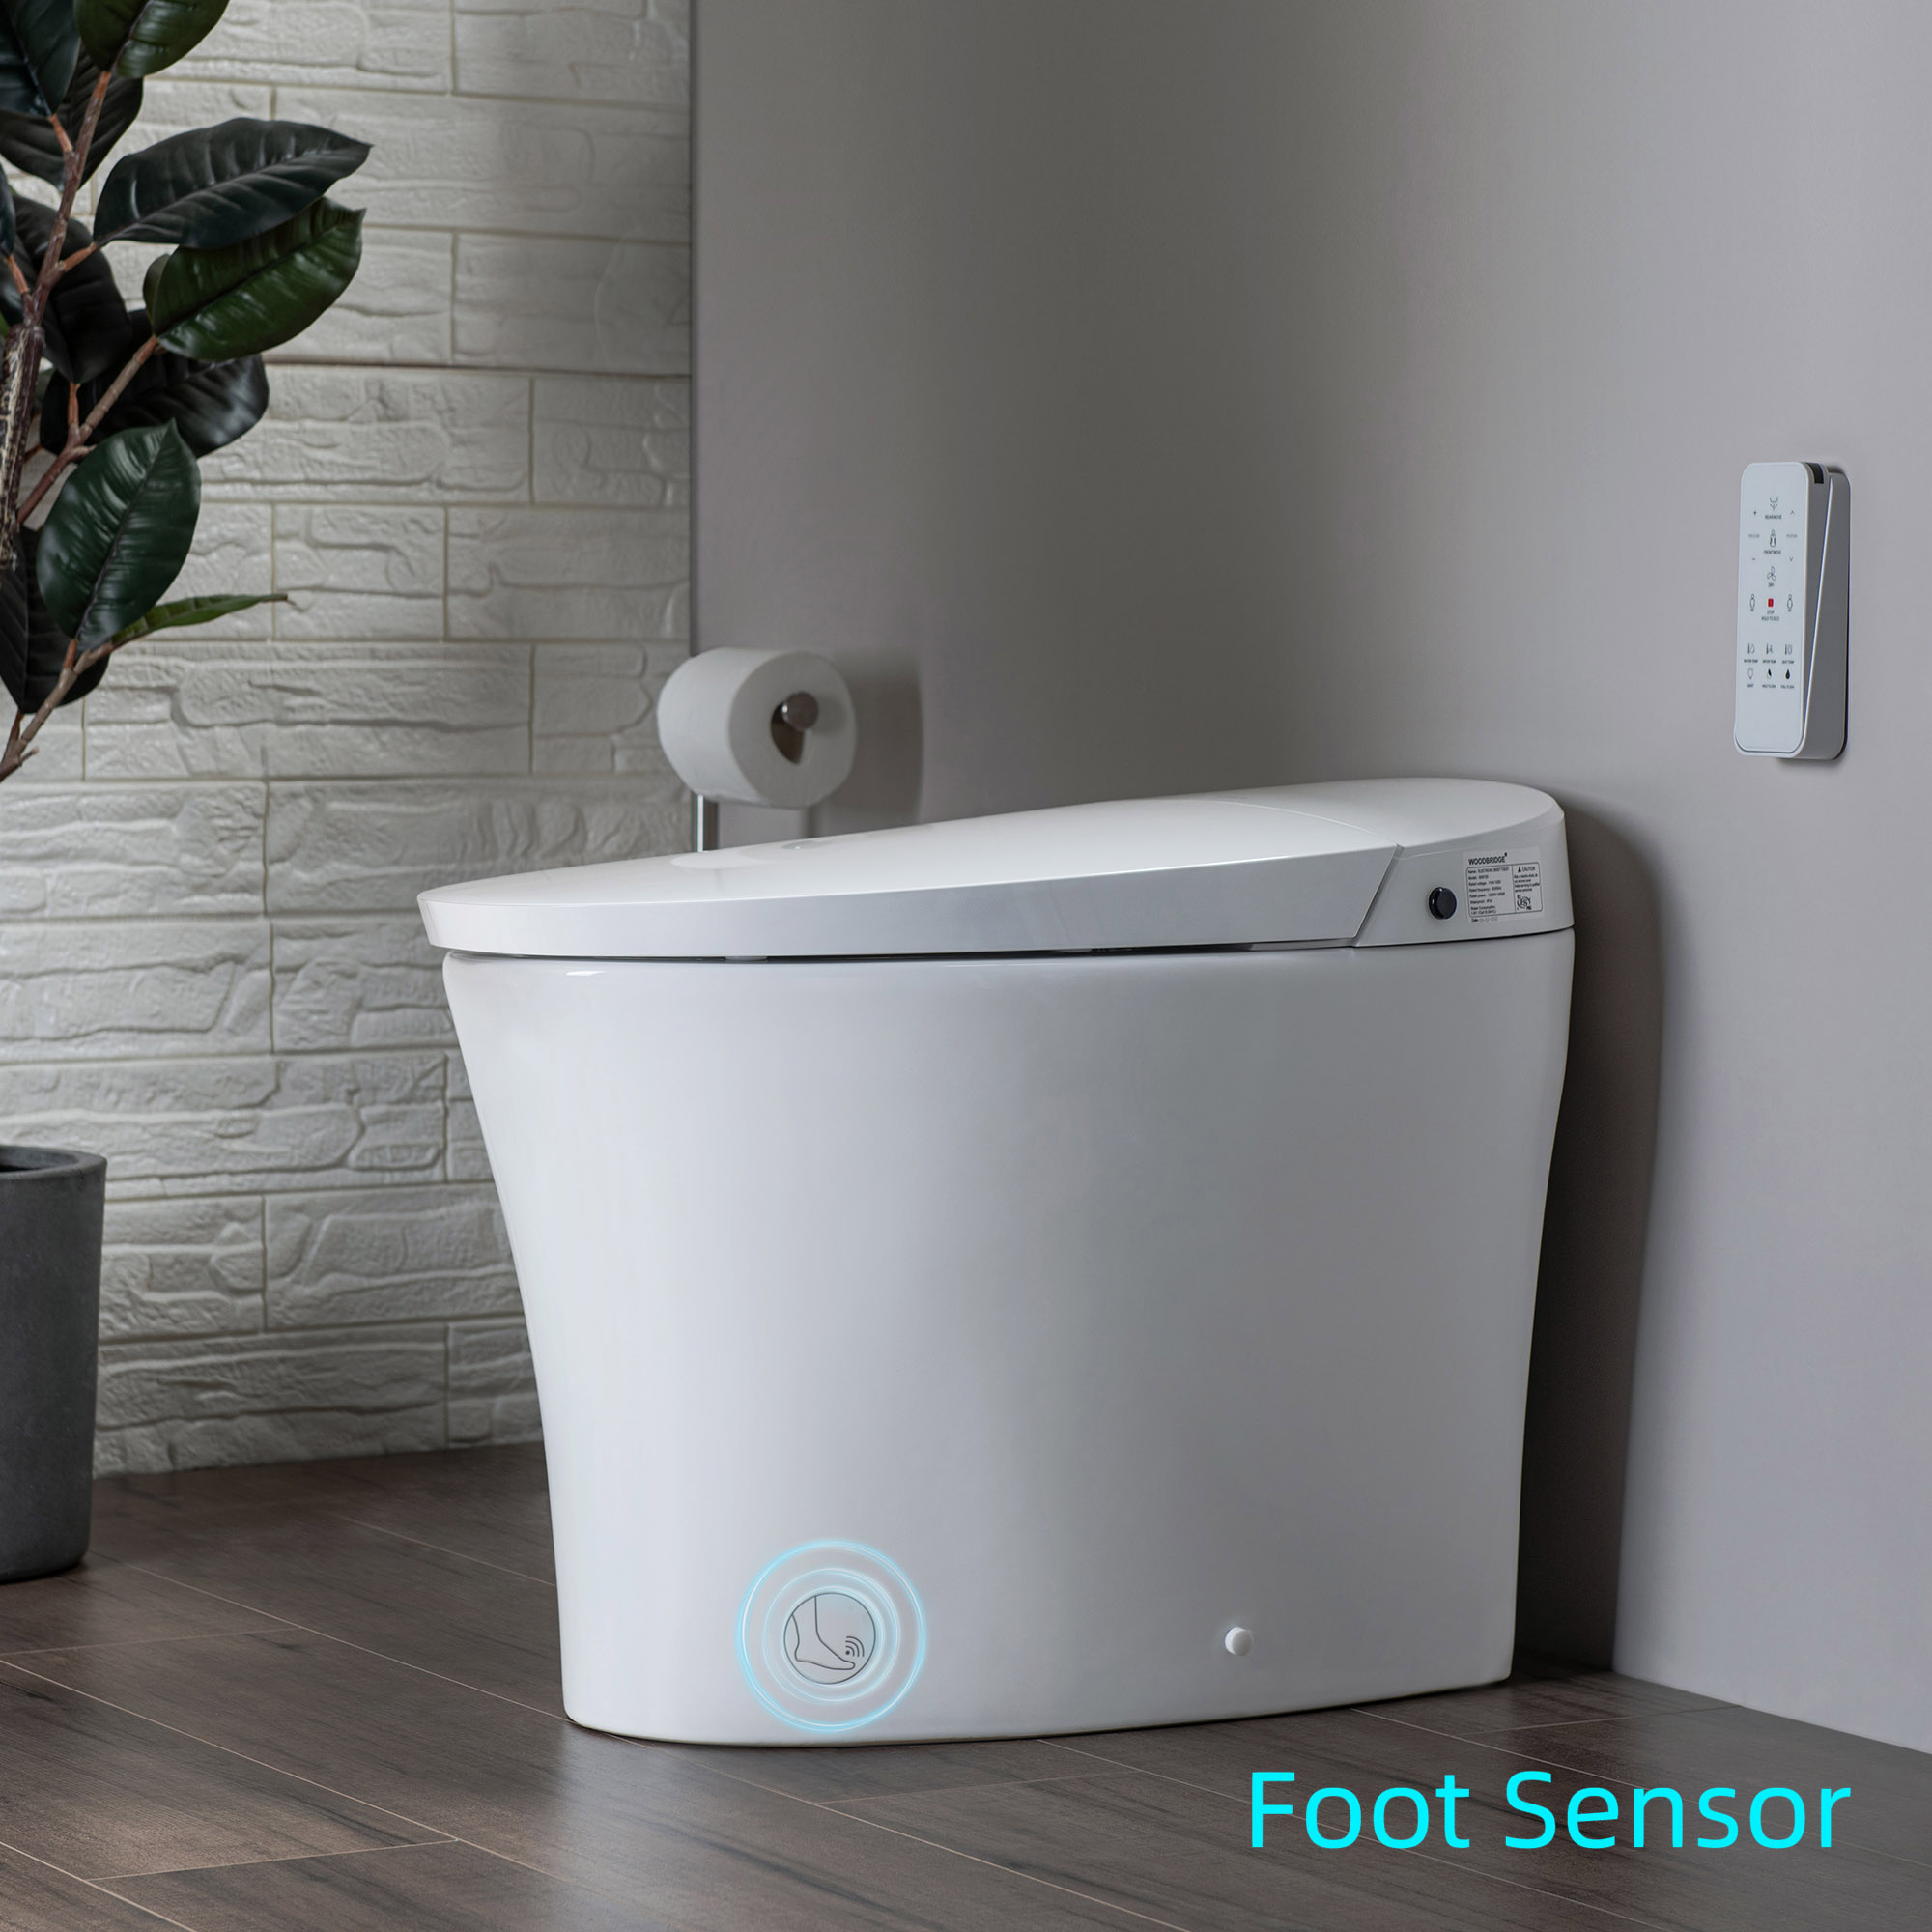  WOODBRIDGE B0970S Smart Bidet Tankless Toilet Elongated One Piece Chair Height, Auto Flush, Foot Sensor Operation, Heated Seat with Integrated Multi Function Remote Control in White_12175